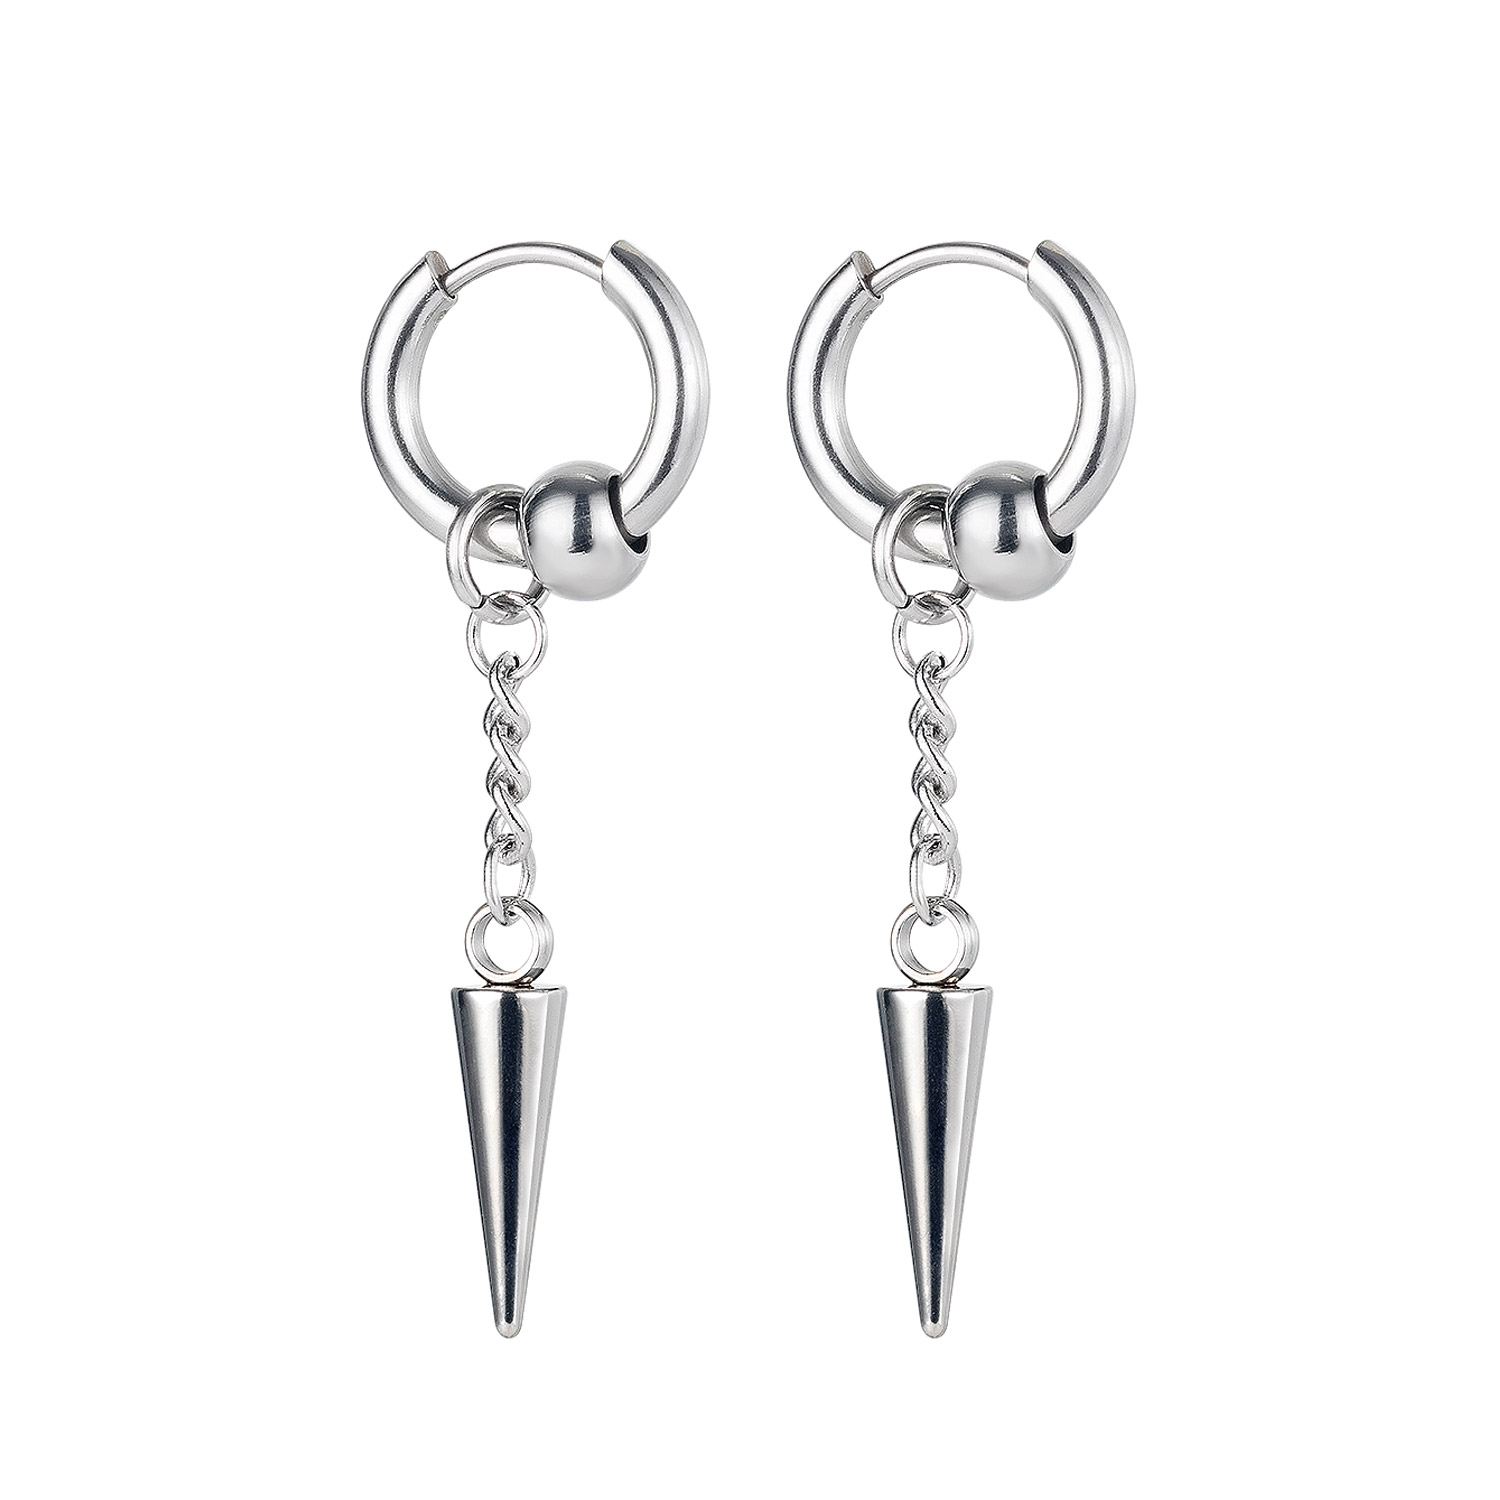 New Style Conical Earrings